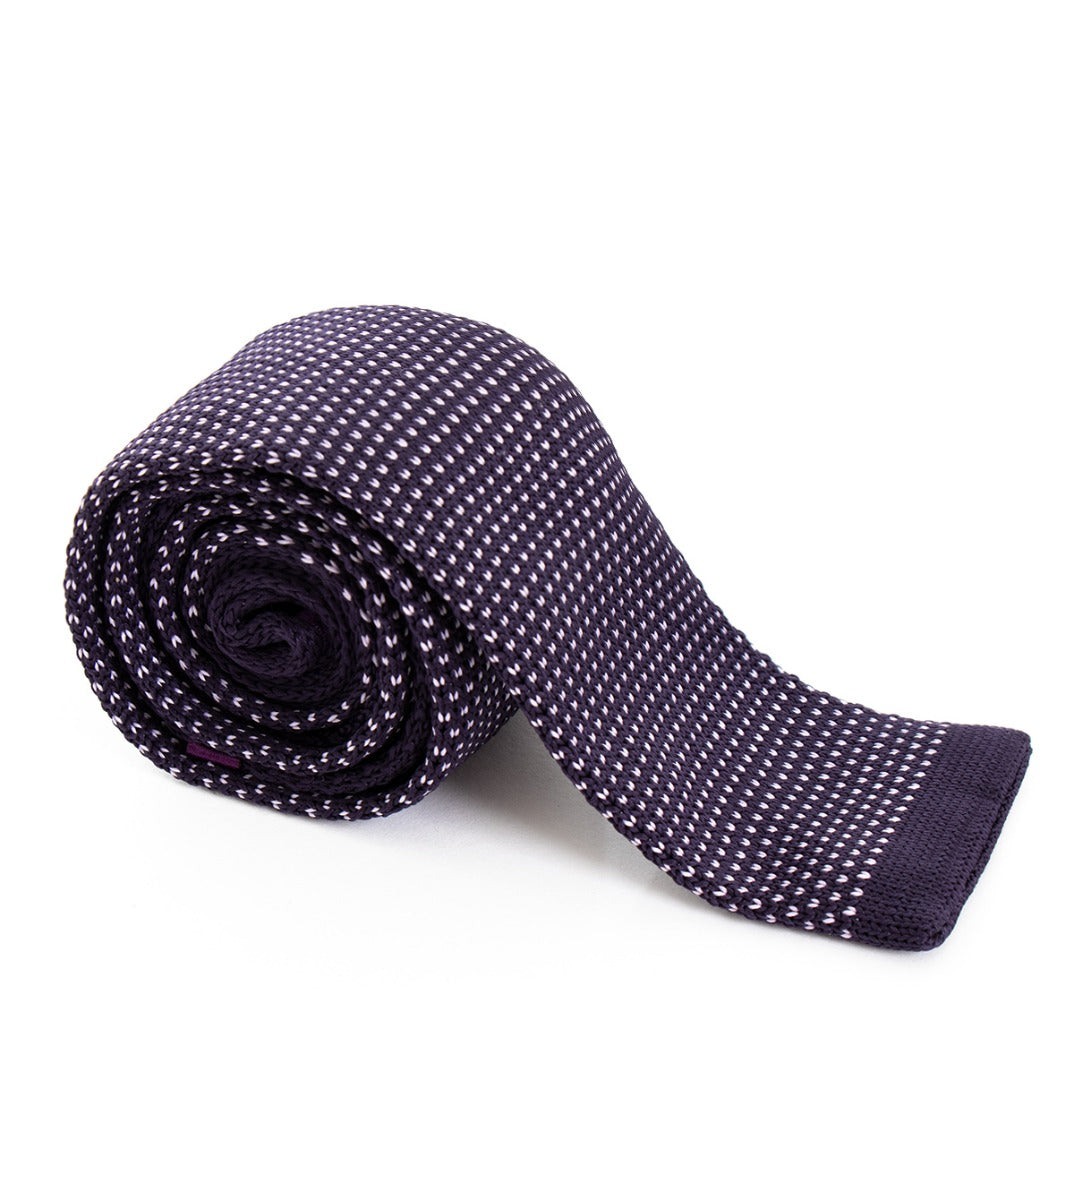 Unisex Men's Knitted Tie Micro Patterned Tricot Knitted Necktie with Purple Embroidery GIOSAL-CP1089A